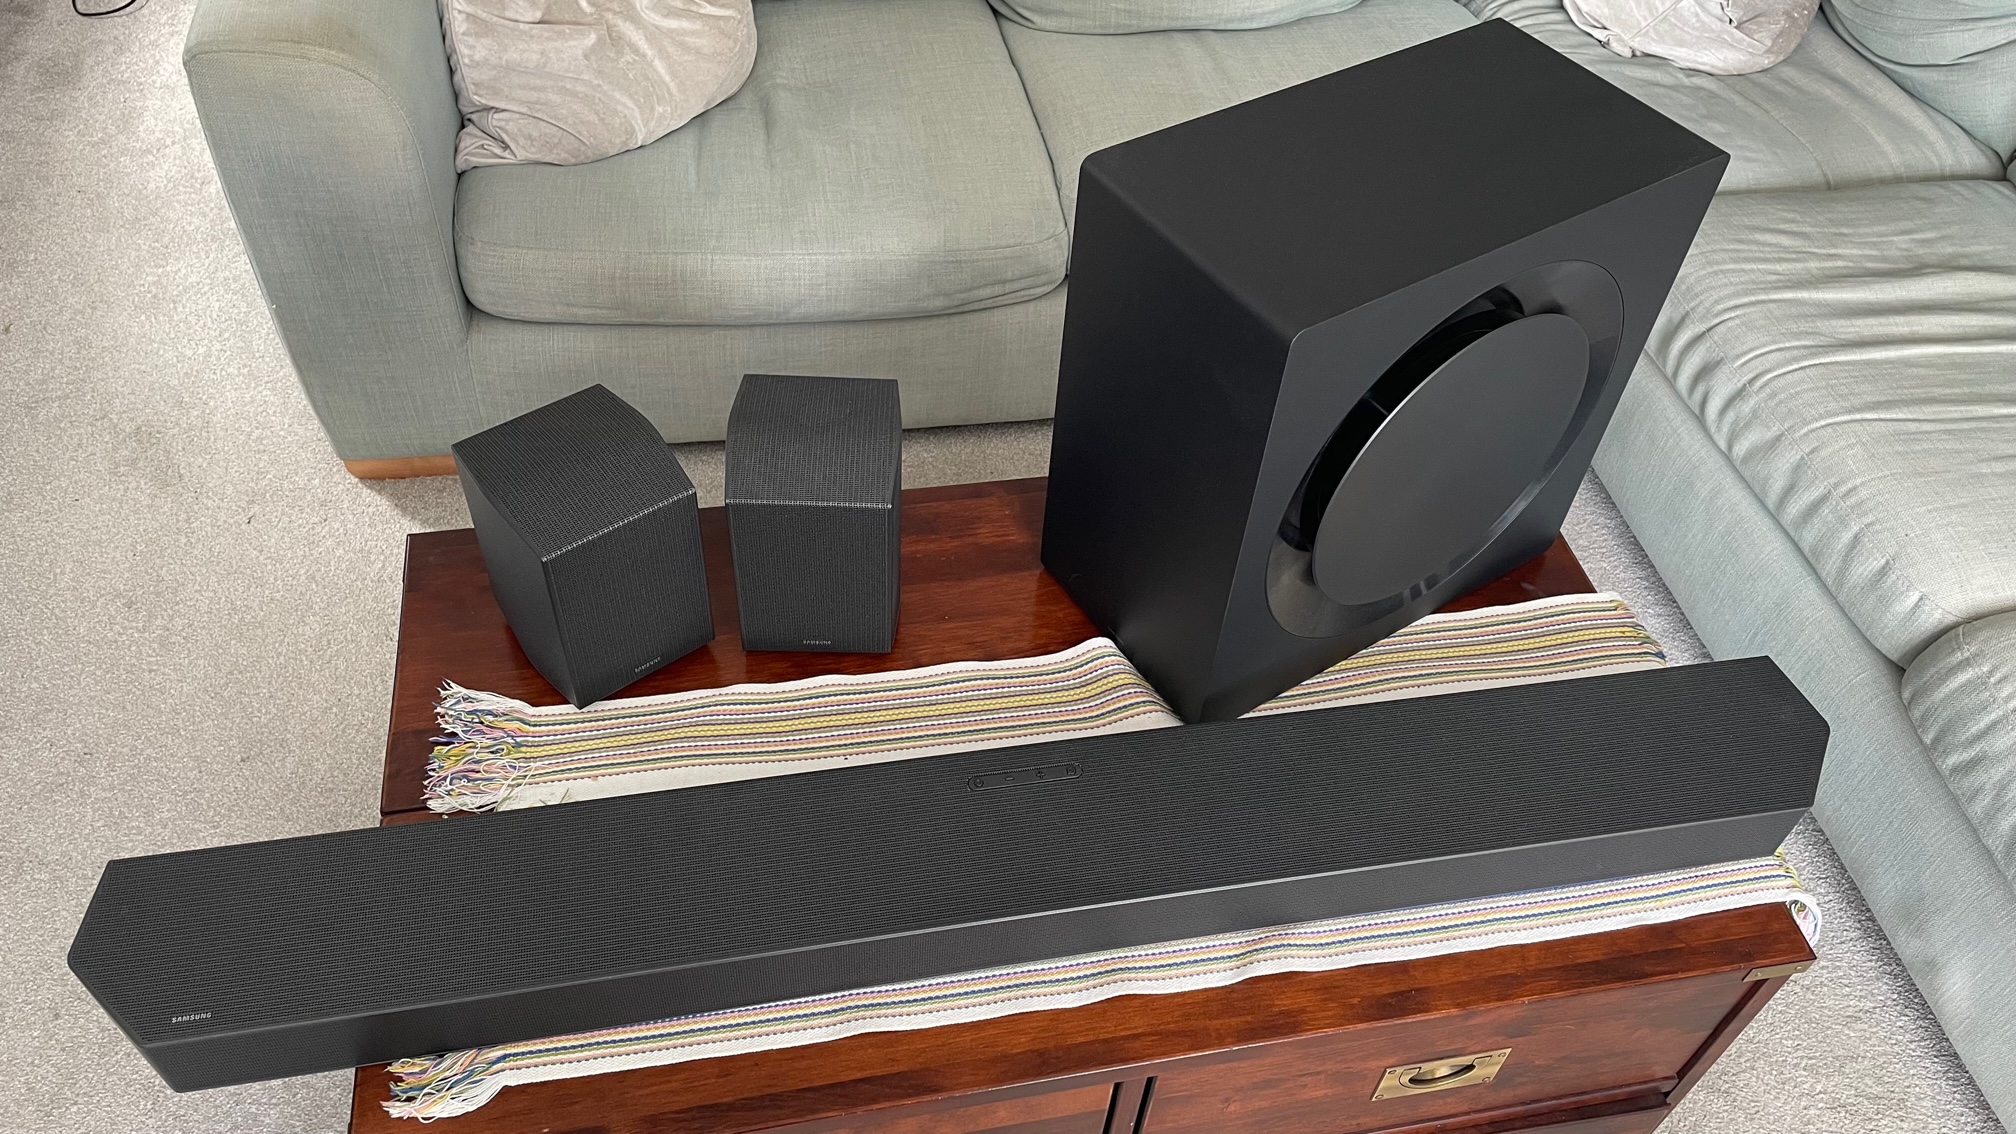 The Samsung HW-Q990C soundbar system pictured in a living room on a wooden table